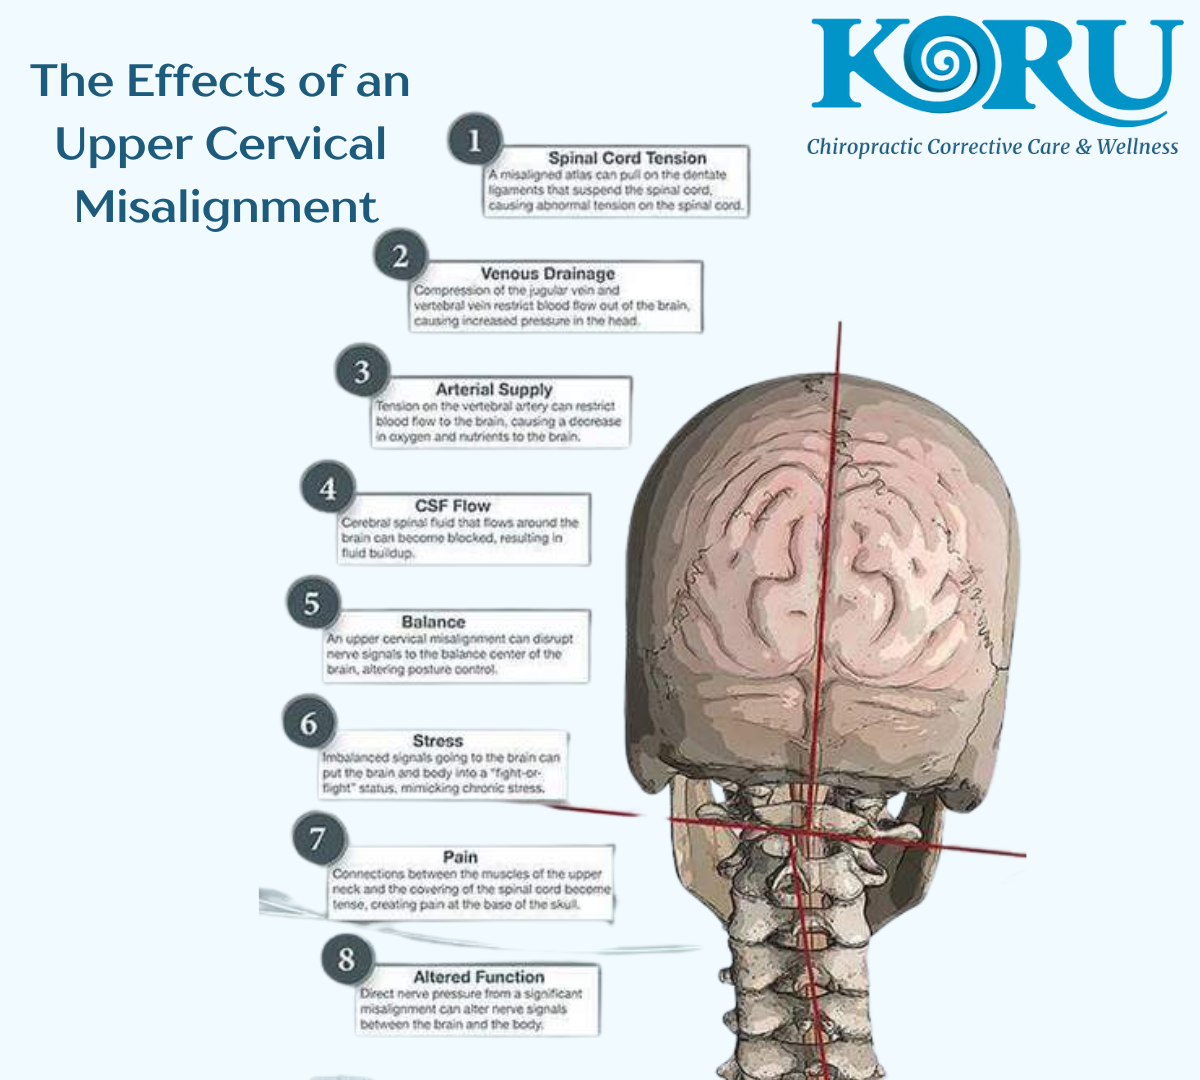 the effects of the upper cervical misalignment